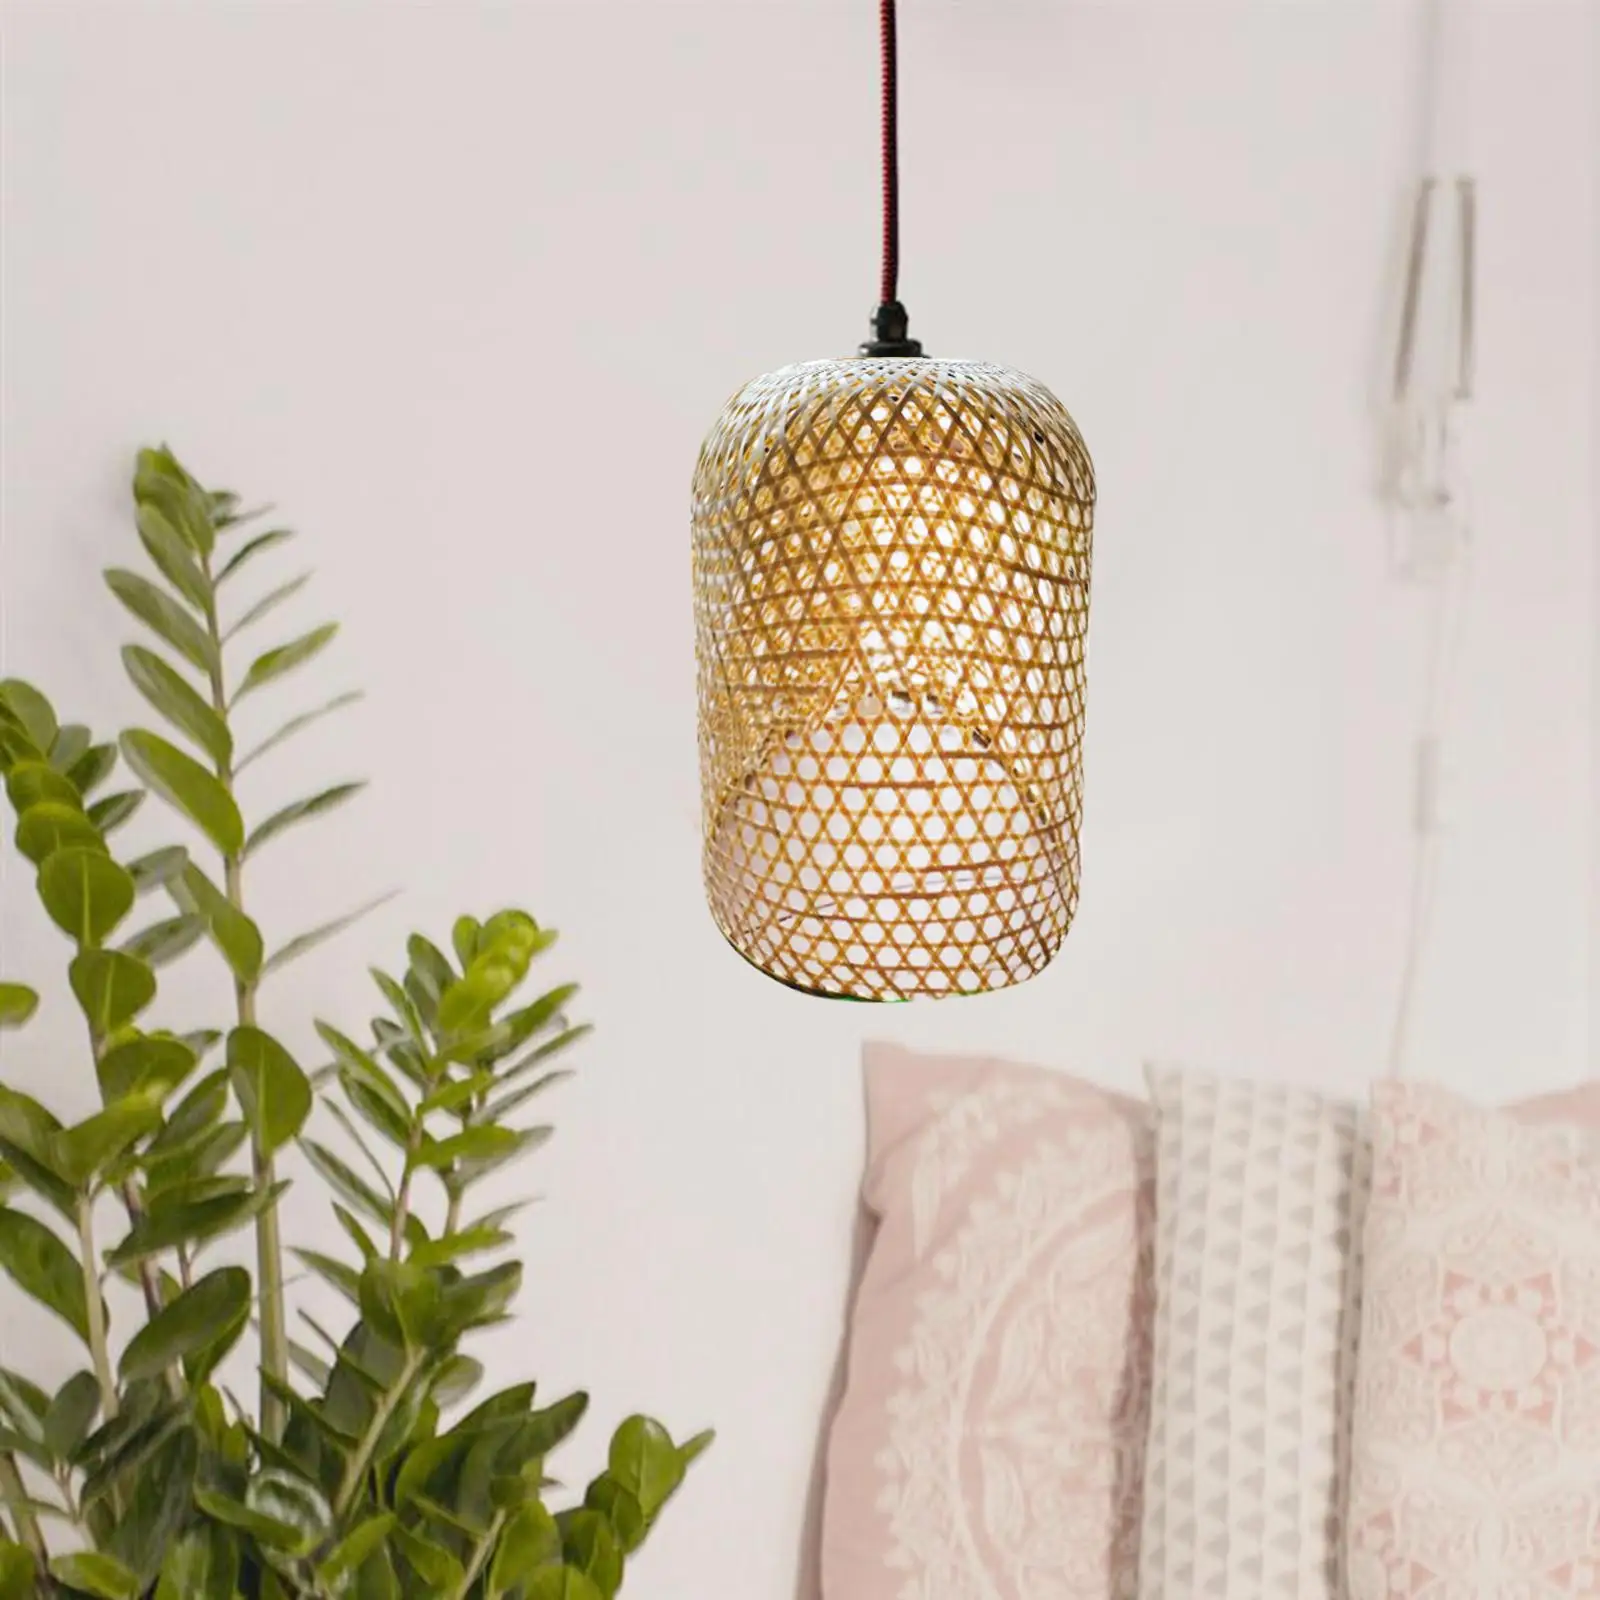 Handmade Weaving Lamp Shade Ceiling Light Cover Lantern Decorative Lamp Accessory for Bedroom Tea House Home Decoration